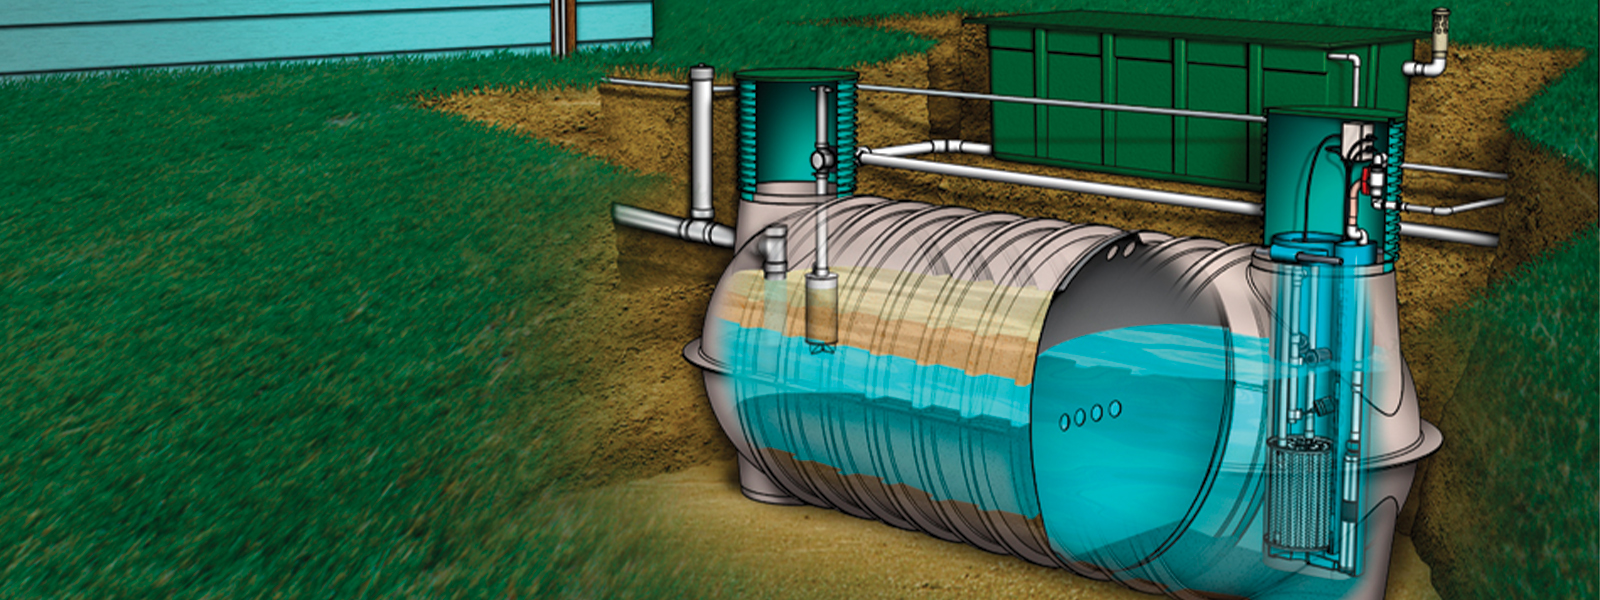 Image of on-lot septic tank and AdvanTex treatment system